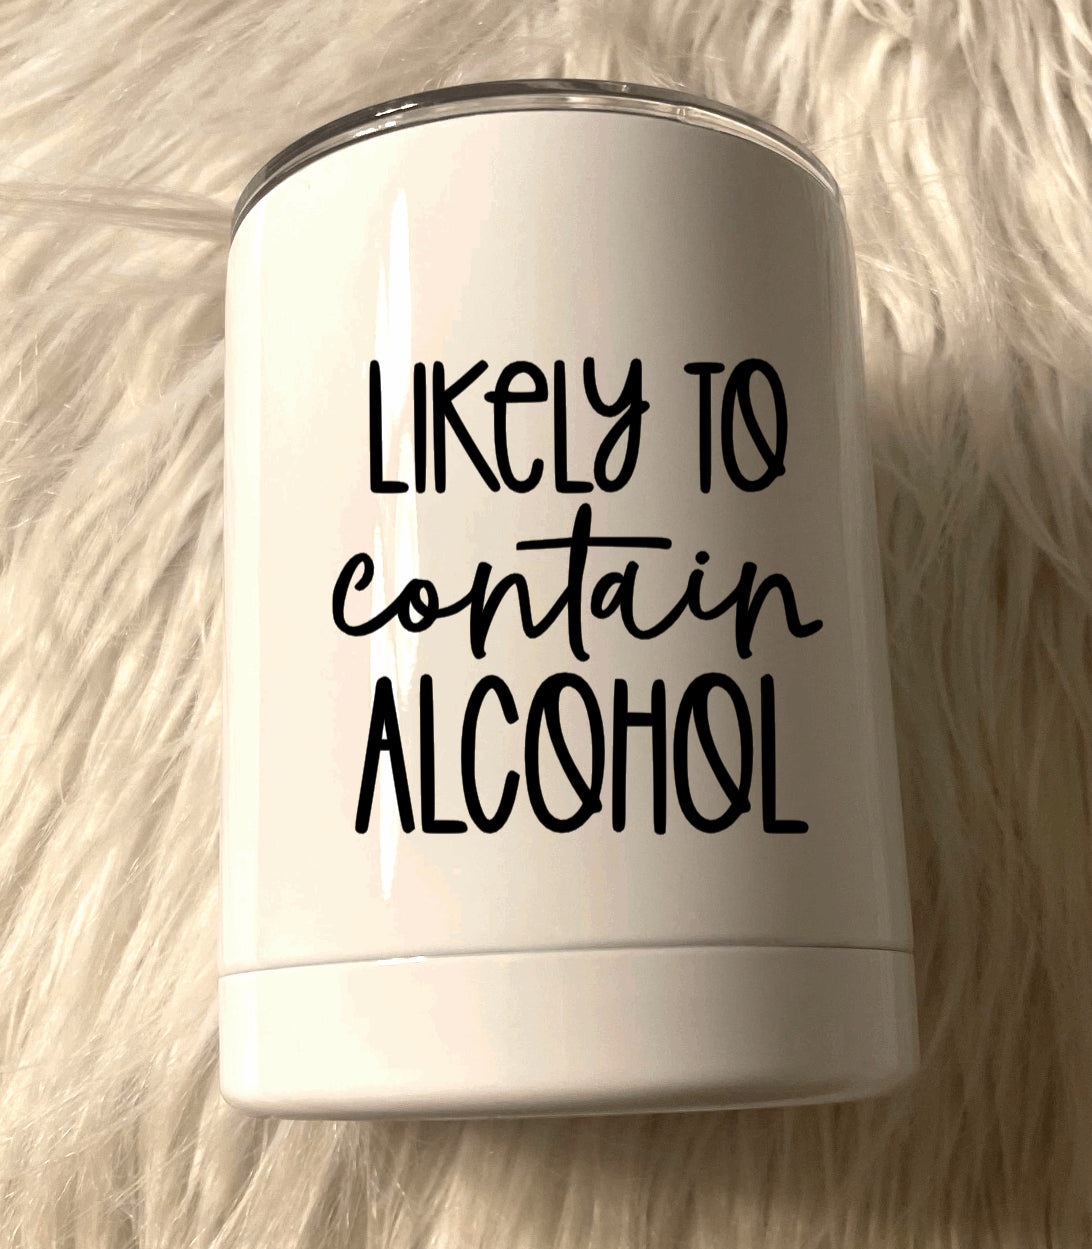 Likely to contain alcohol